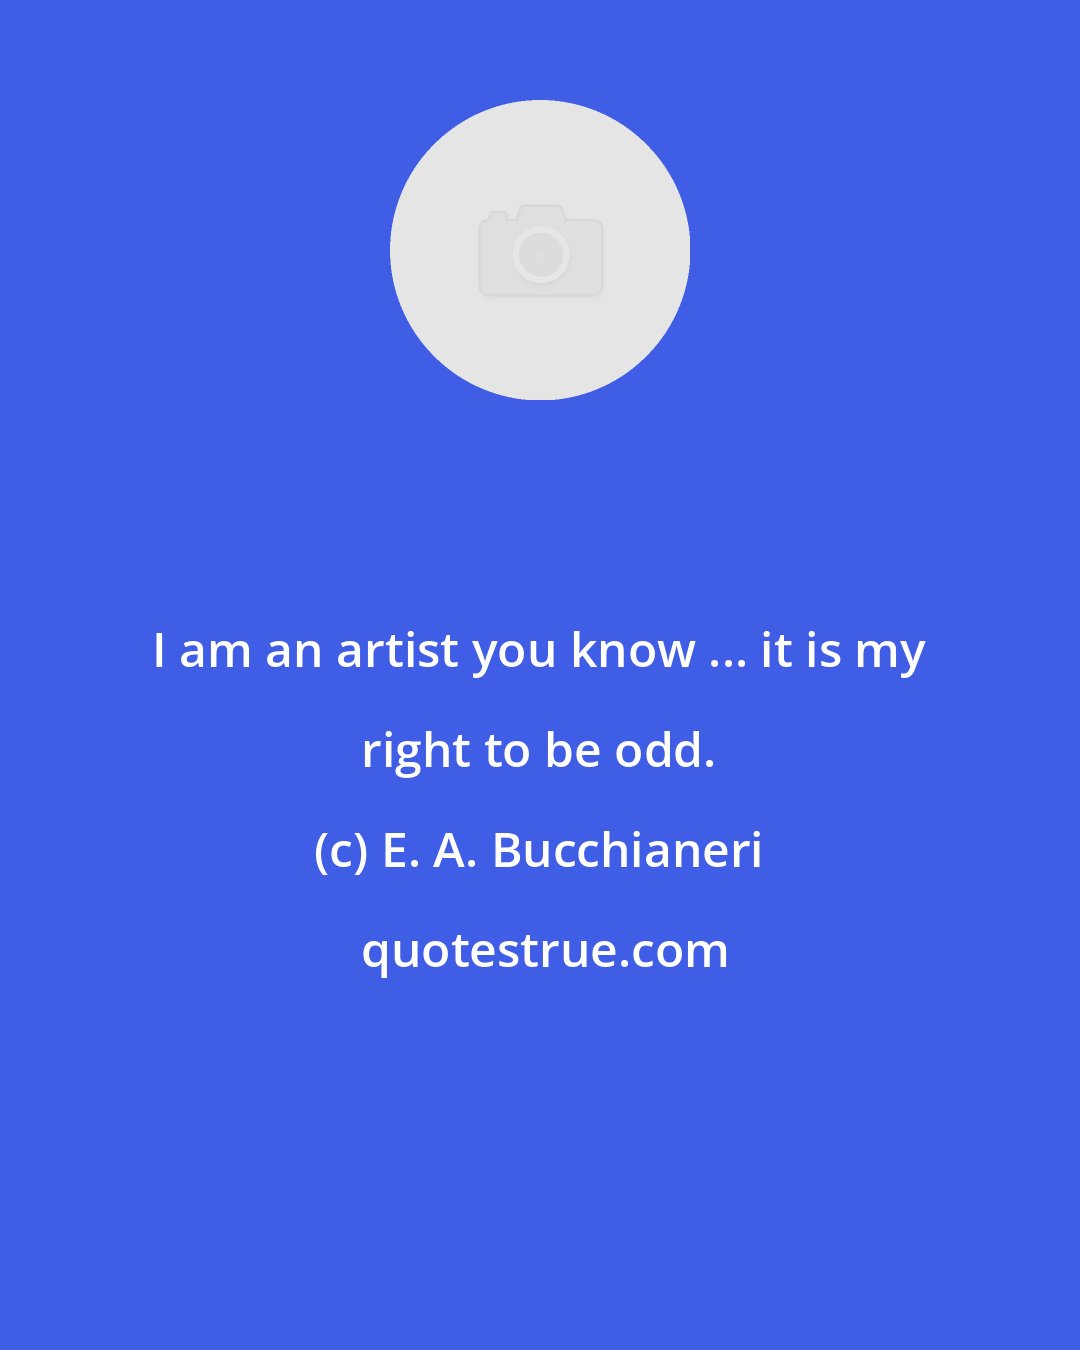 E. A. Bucchianeri: I am an artist you know ... it is my right to be odd.